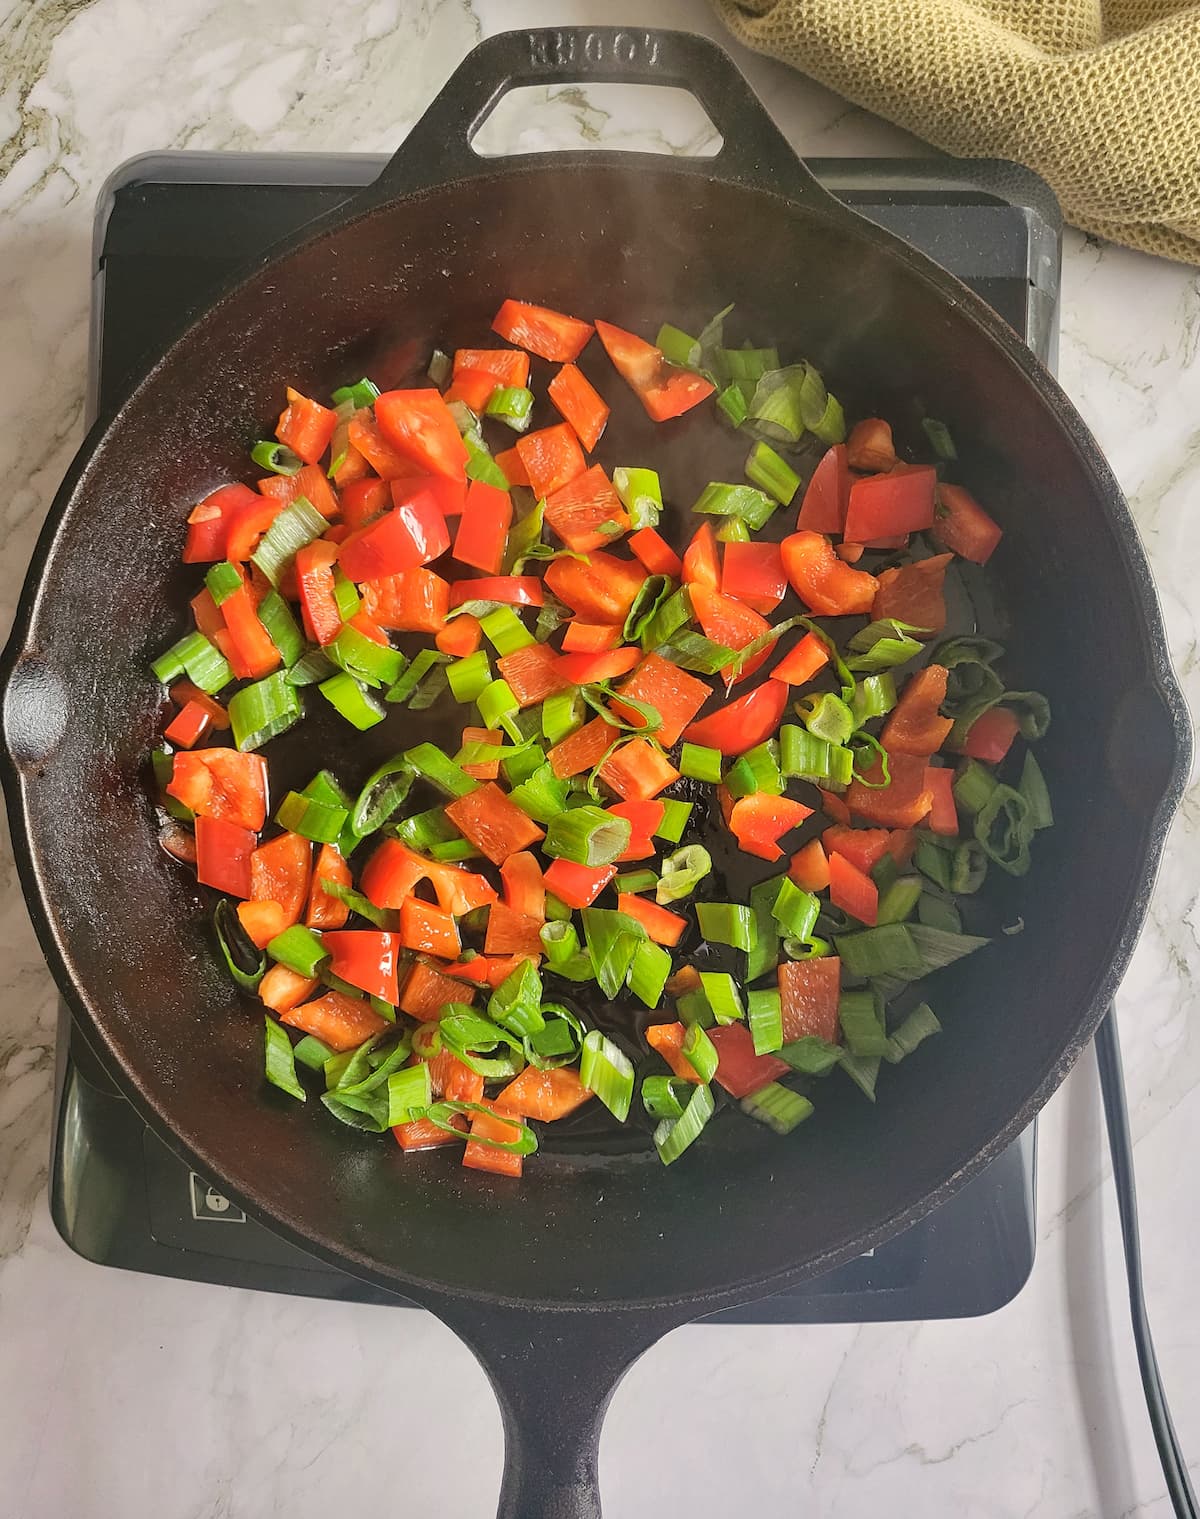 chopped green onions and red peppers in a cast iron skillet on a burner